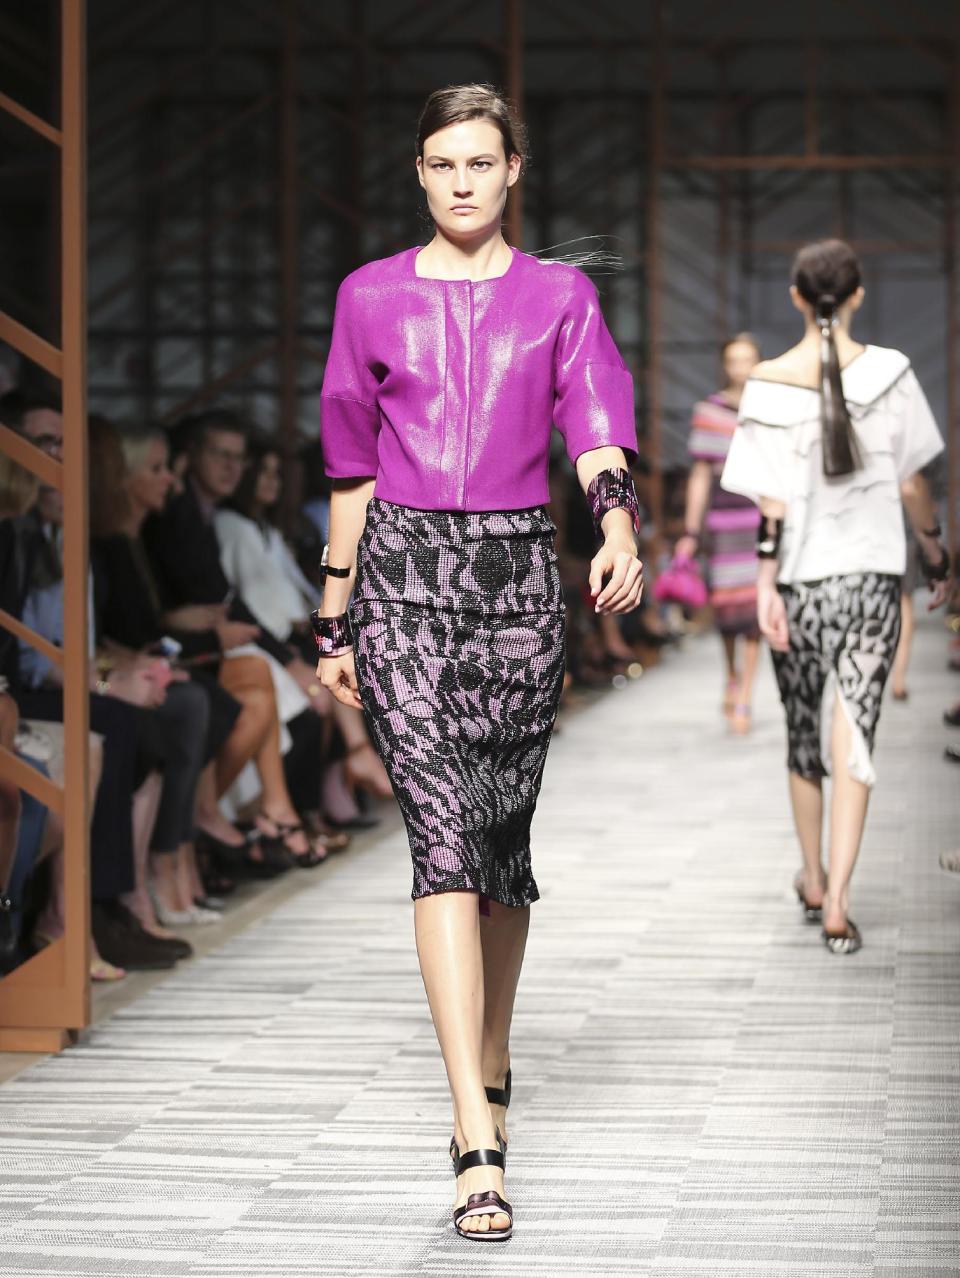 FILE - In this Sept. 22, 2013 file photo, a model wears a creation for Missoni women's Spring-Summer 2014 collection, part of the Milan Fashion Week, unveiled in Milan, Italy. Orchid is growing on us: A version of the purple hue is Pantone Inc.’s color of the year for 2014. (AP Photo/Antonio Calanni, File)